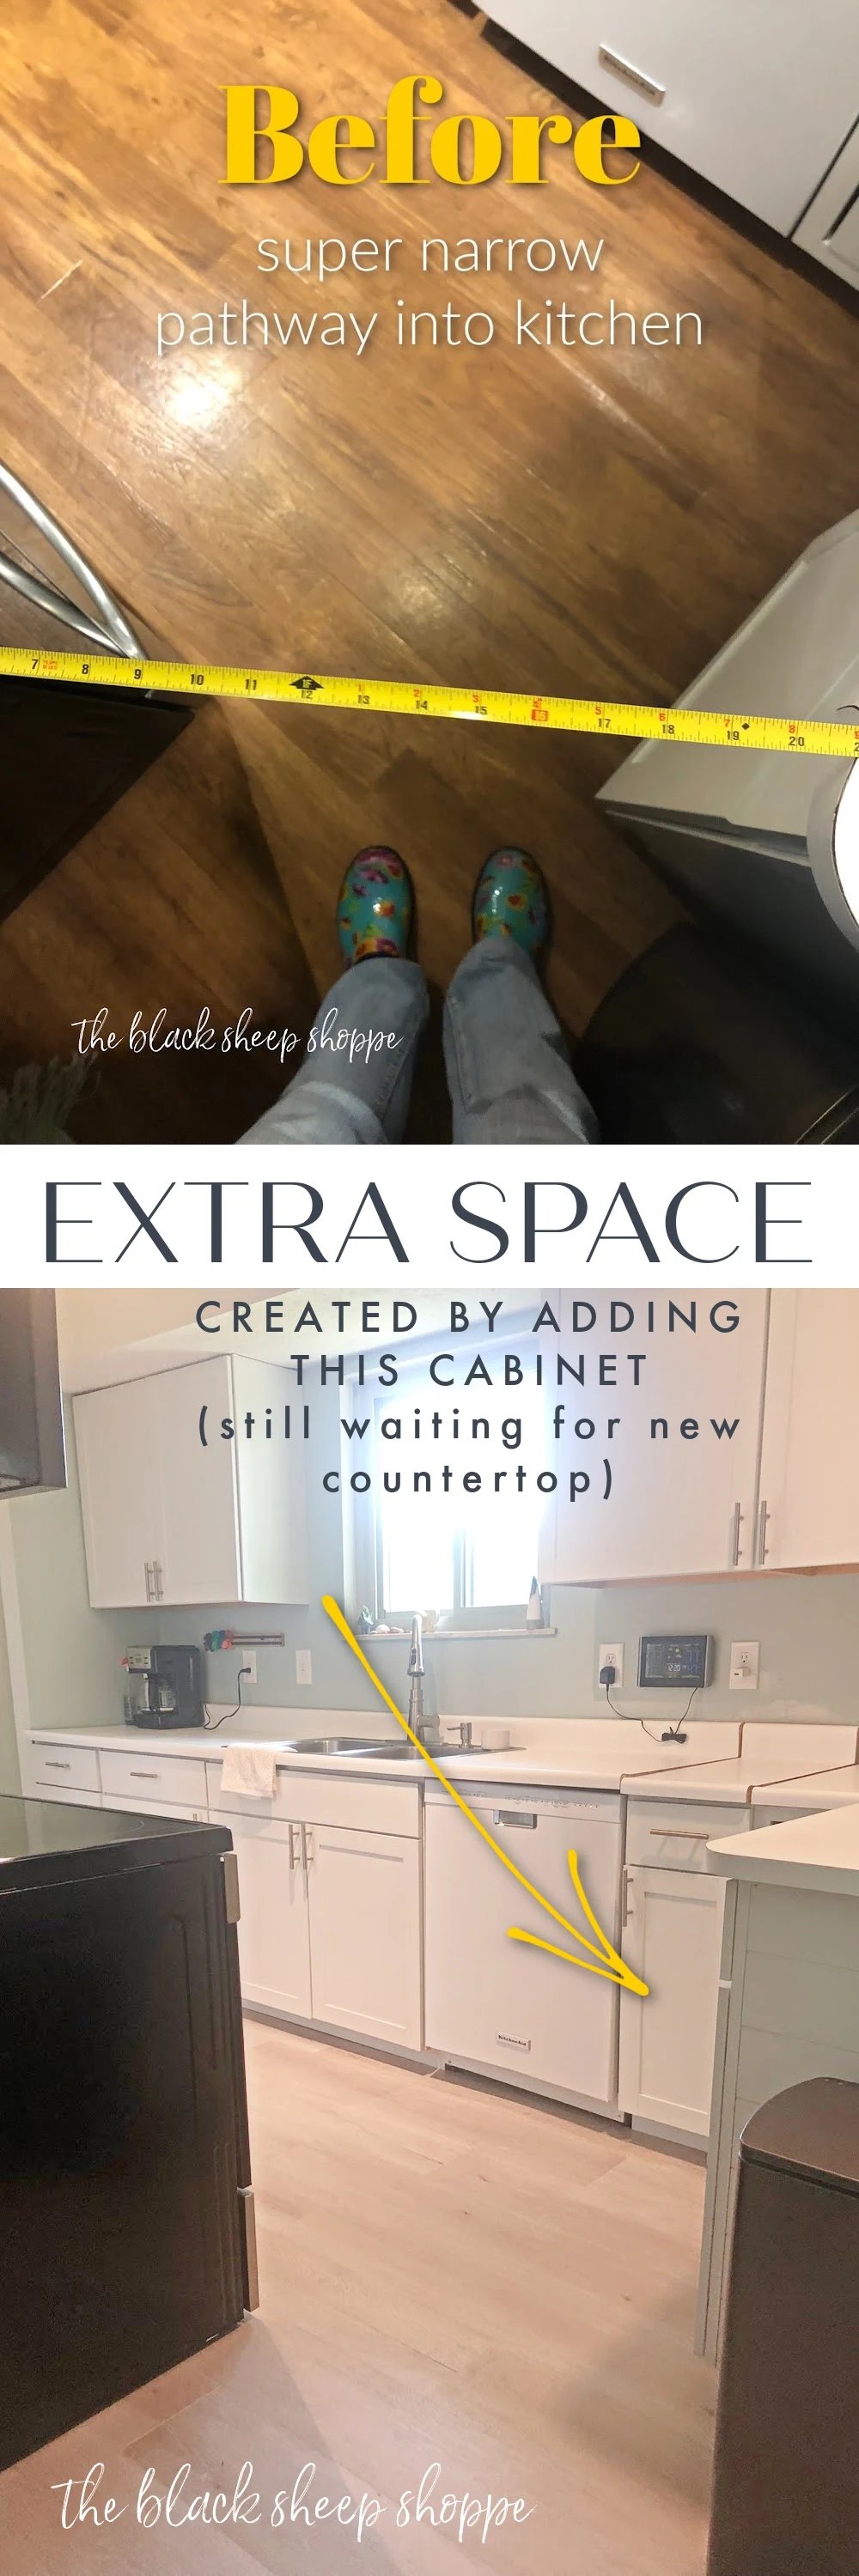 My design plan created space for less than $200.